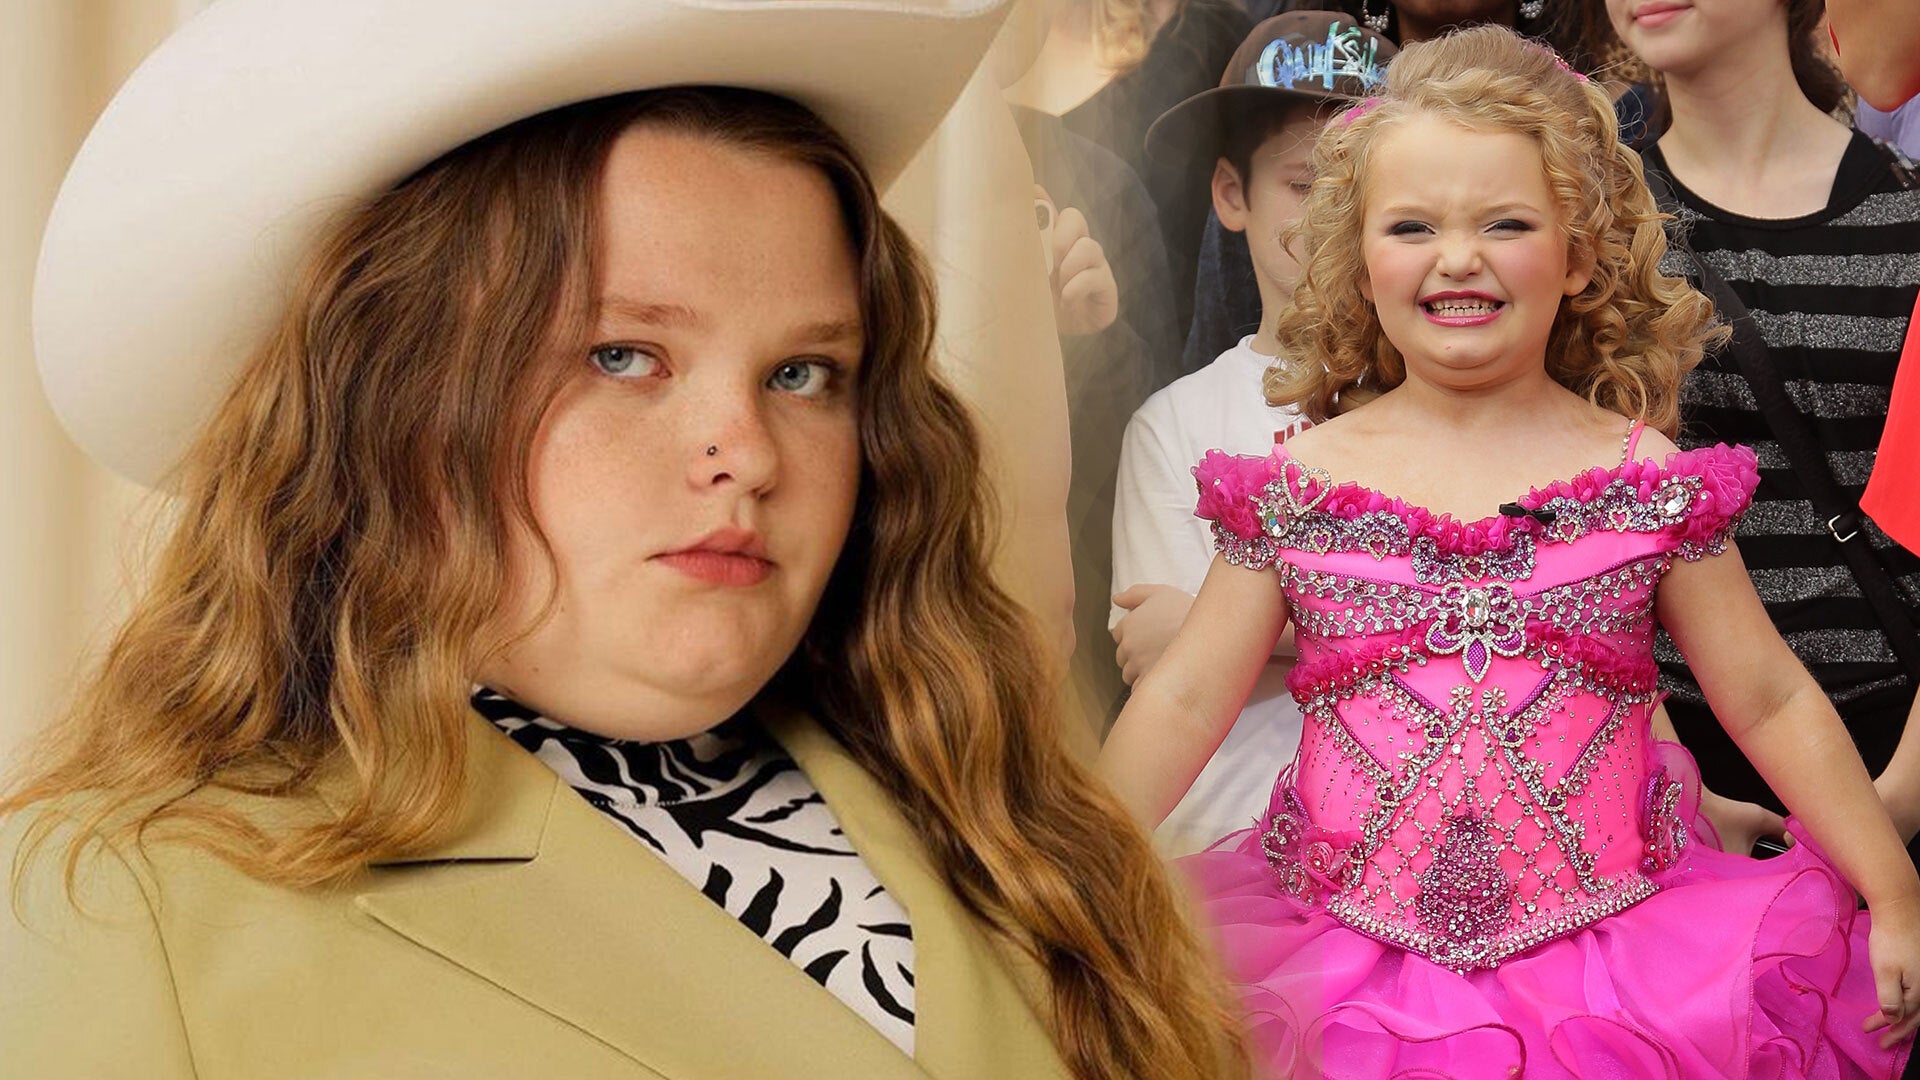 Alana Honey Boo Boo Thompson Is All Grown Up With a New Look image